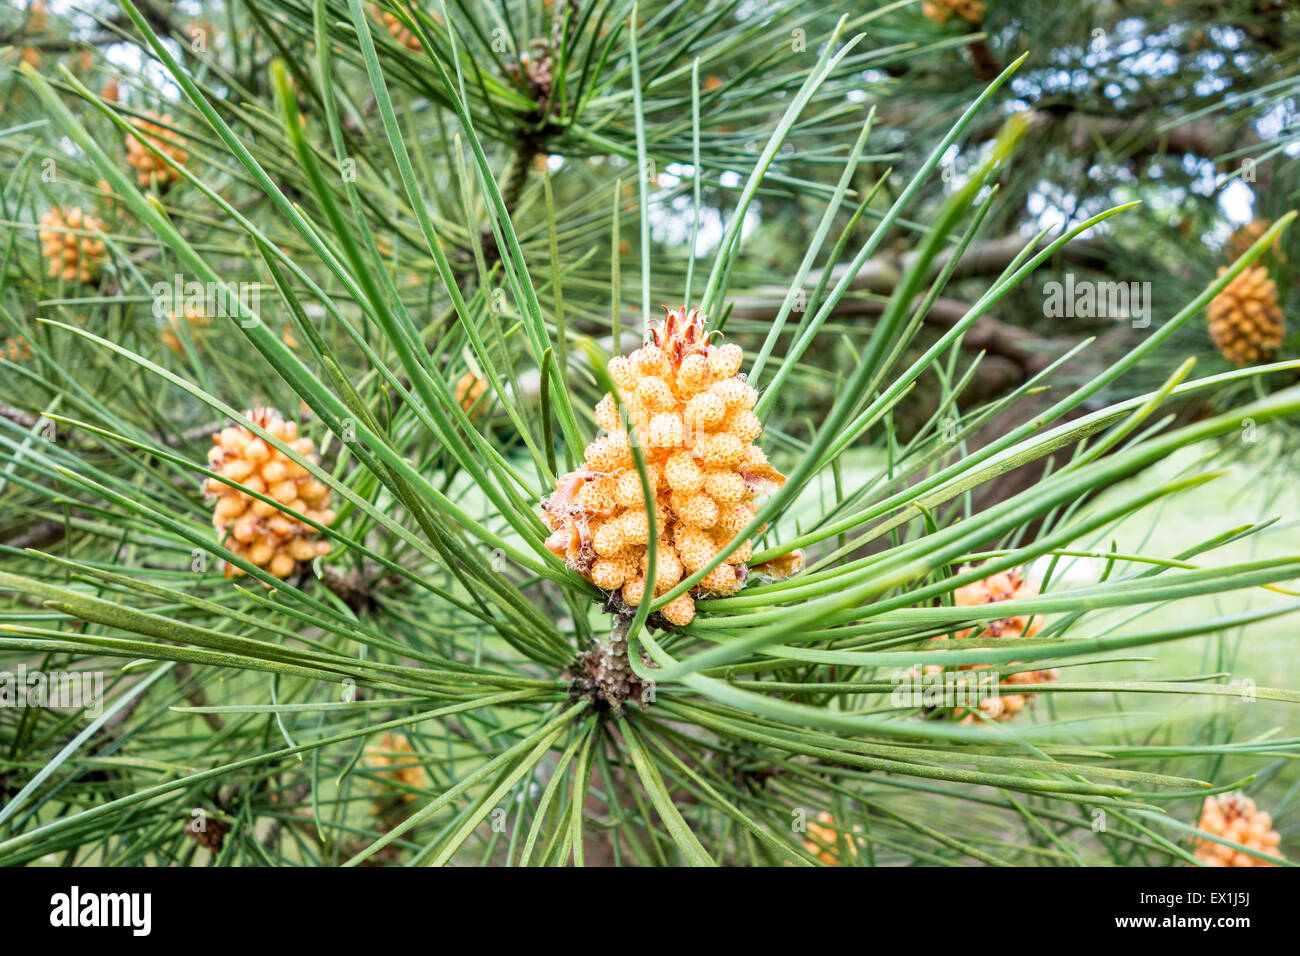 Pine cone forming on a fir tree in the UK Stock Photo